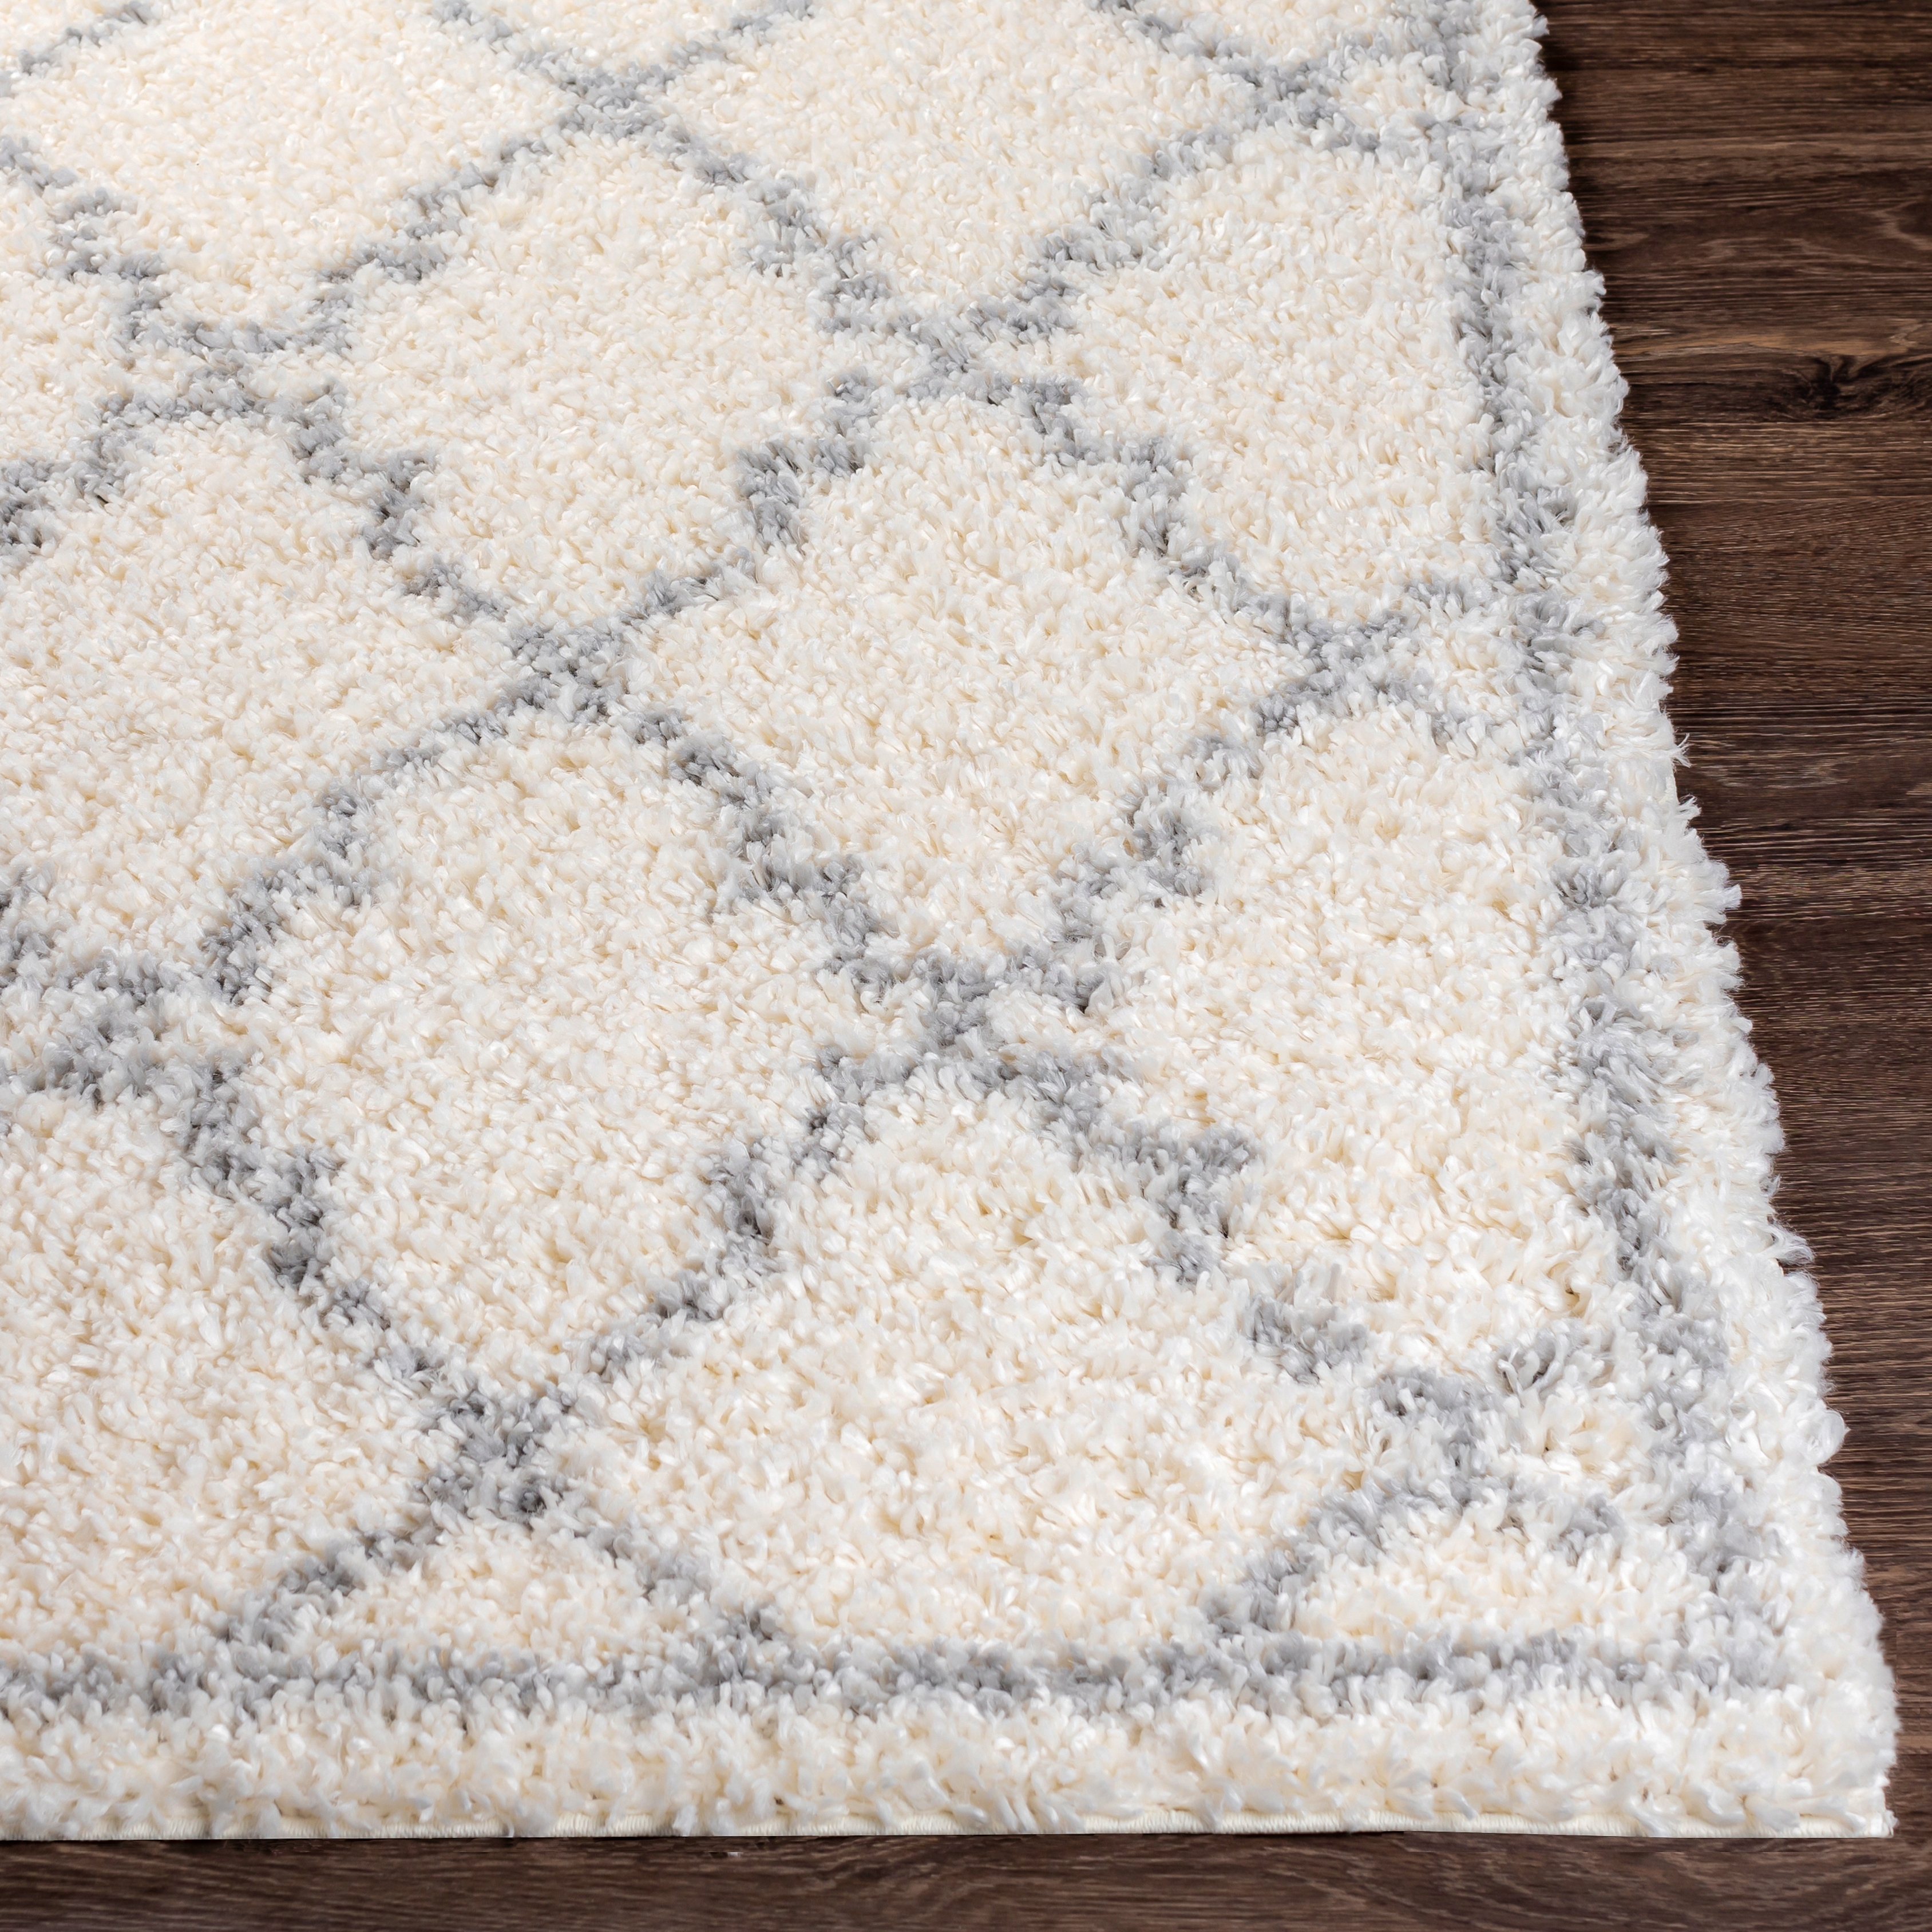 Deluxe Shag Rug, 6'7" x 9' - Image 2